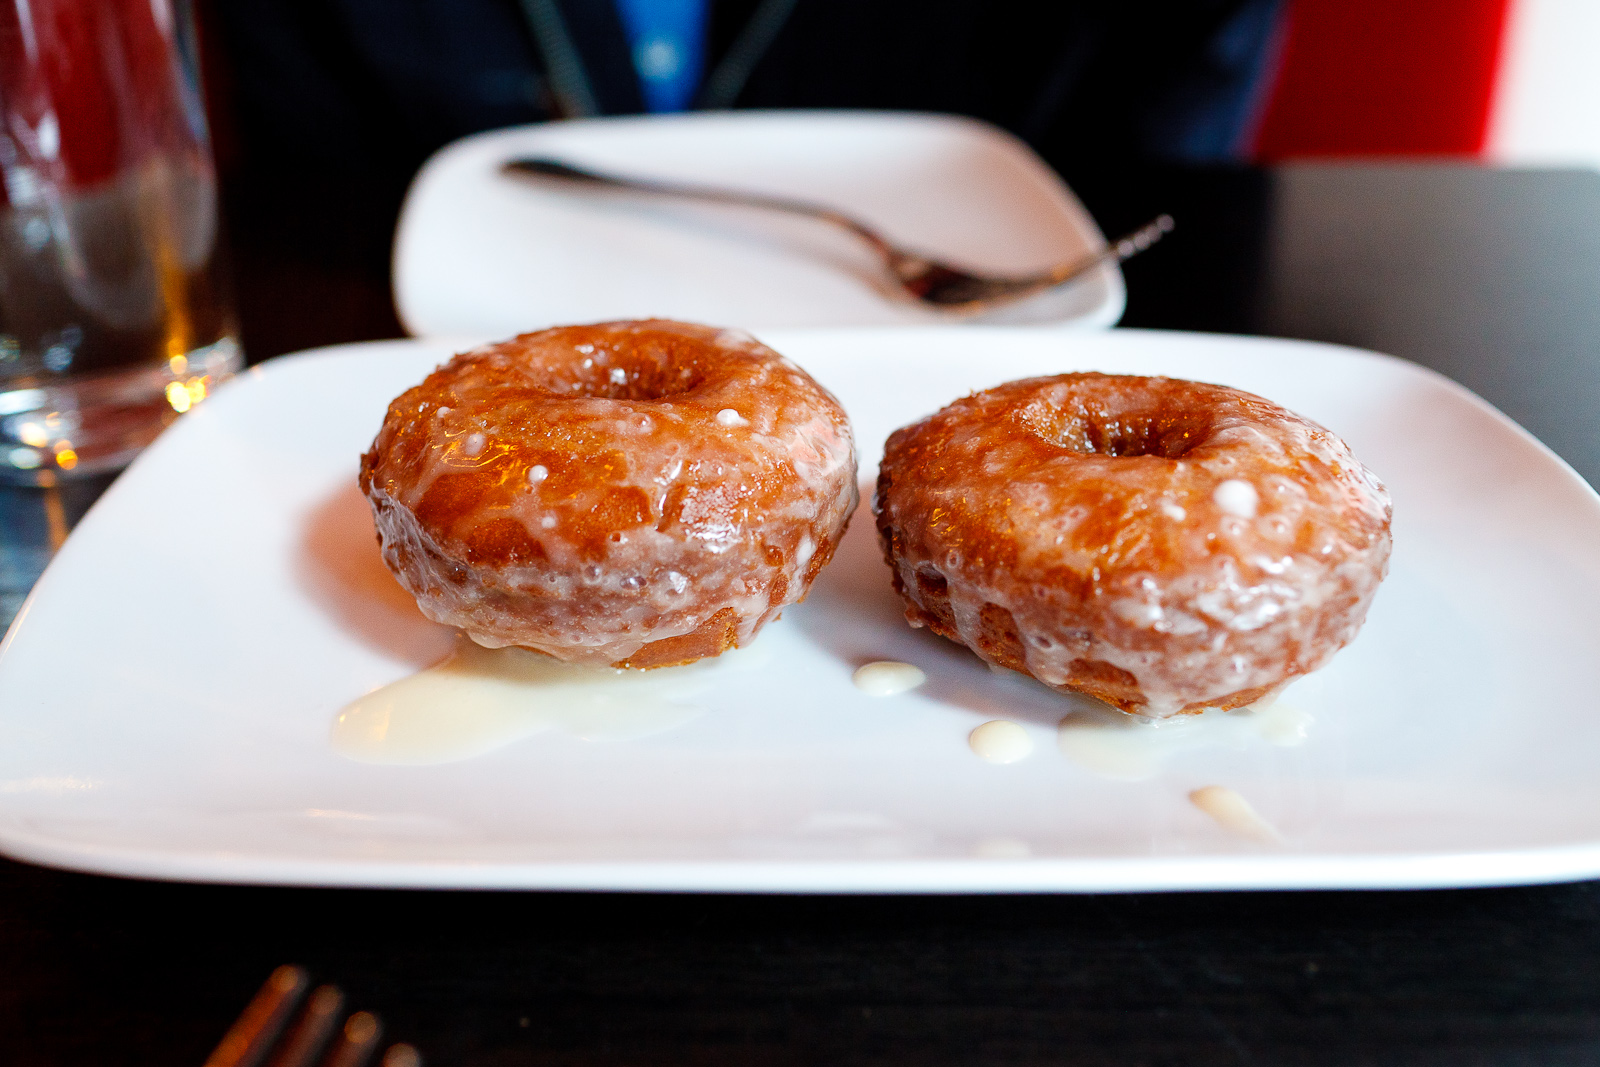 Cider-glazed doughnuts, made to order ($6)